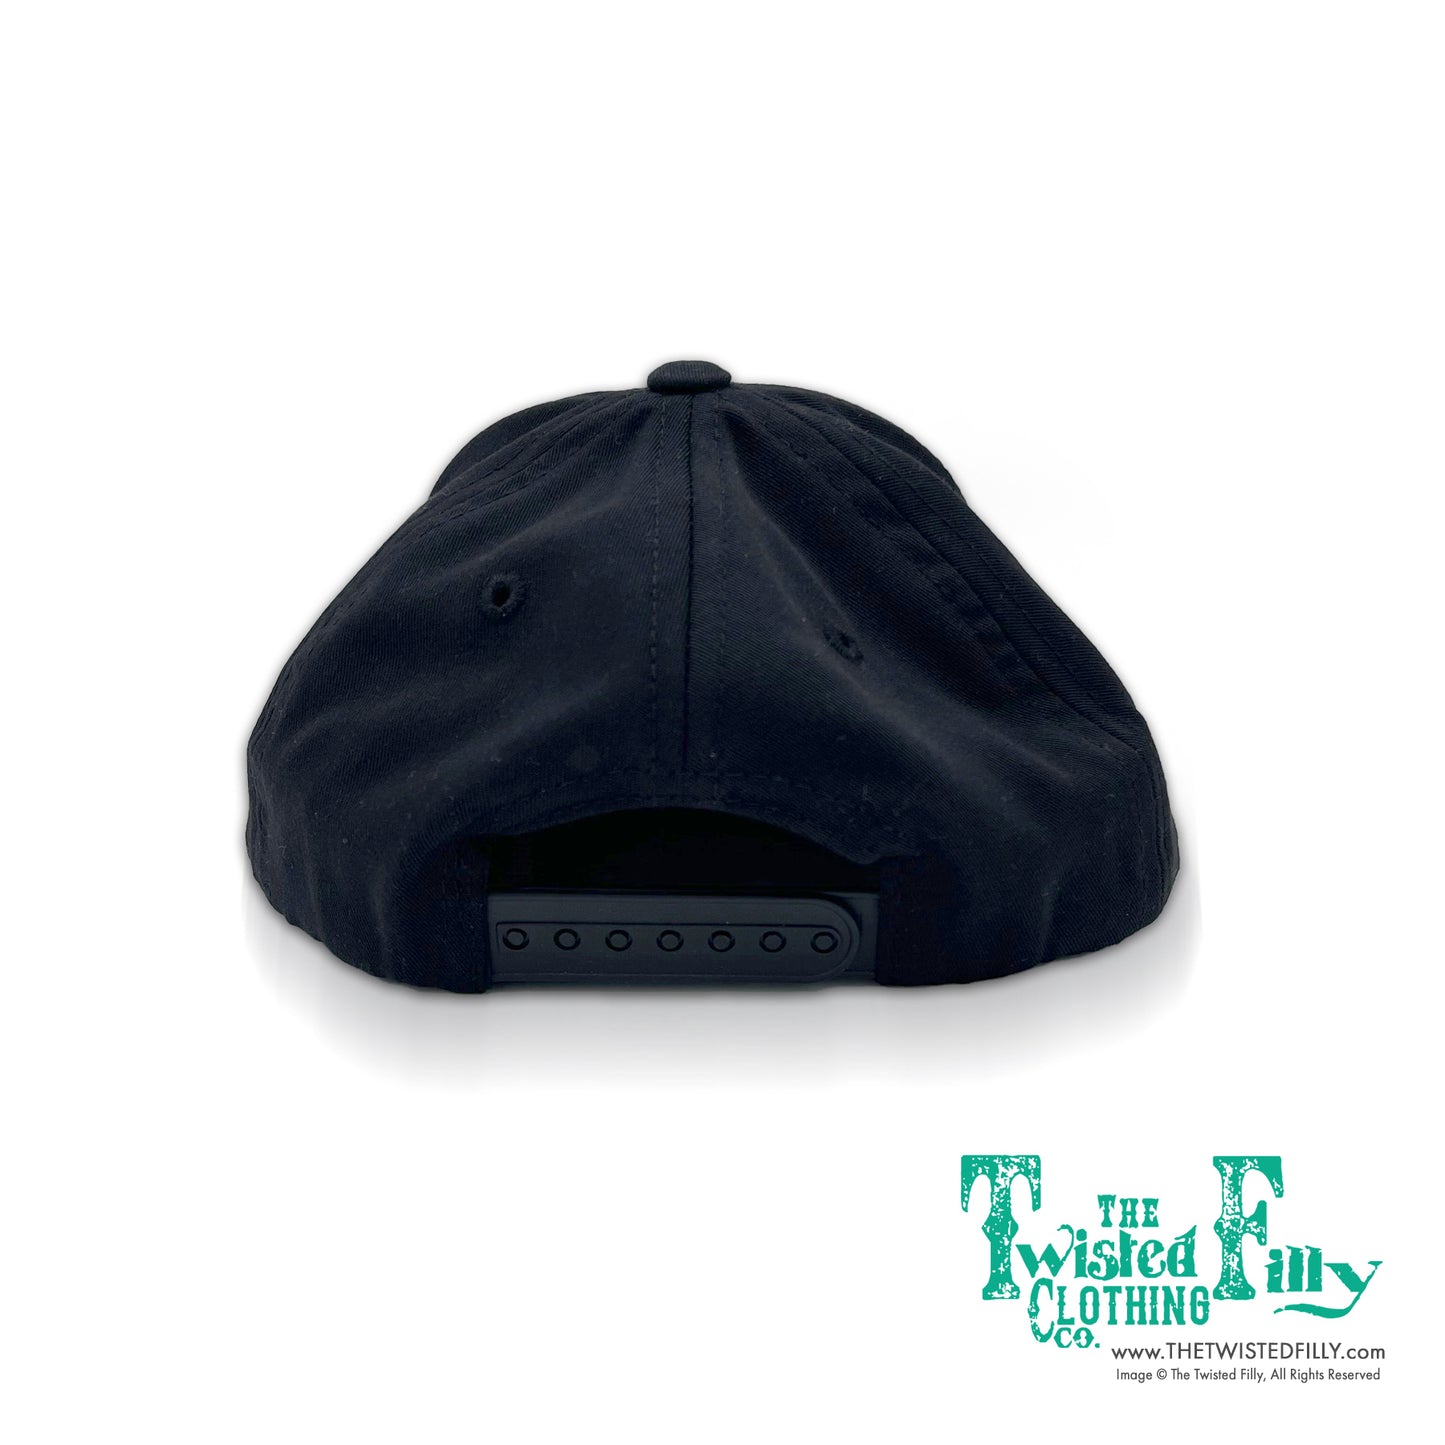 The Twisted Filly - Youth/Adult Snapback Hat - Black